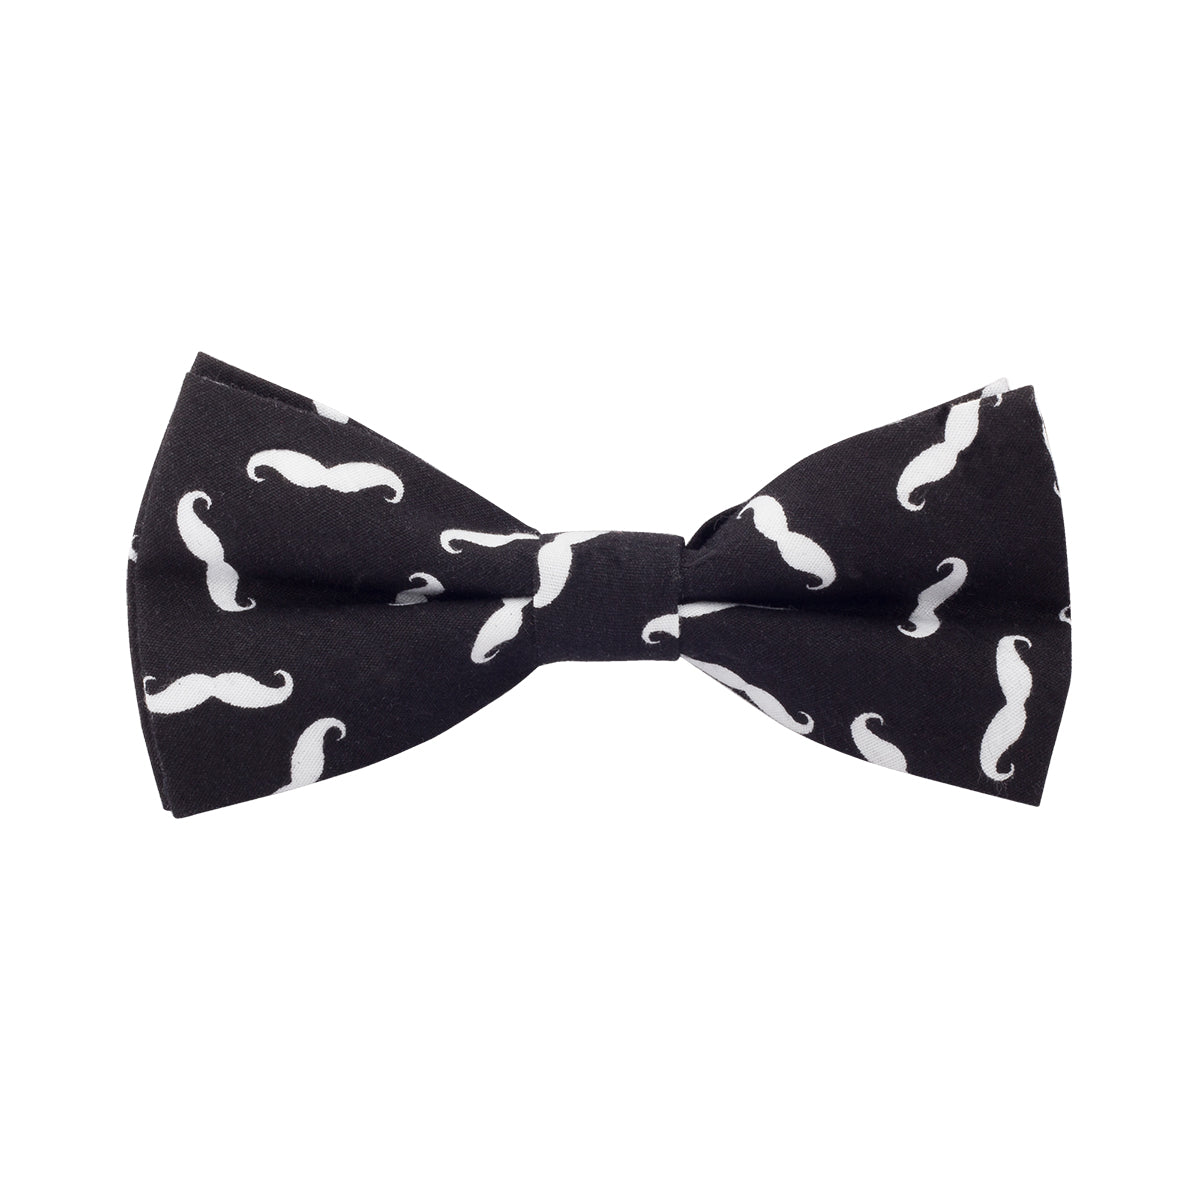 How women love a man in a moustache! So we brought you many. Featuring the ever-famous motif on a pure black base, this bow tie is a funky & unconventional addition to your outfit. 